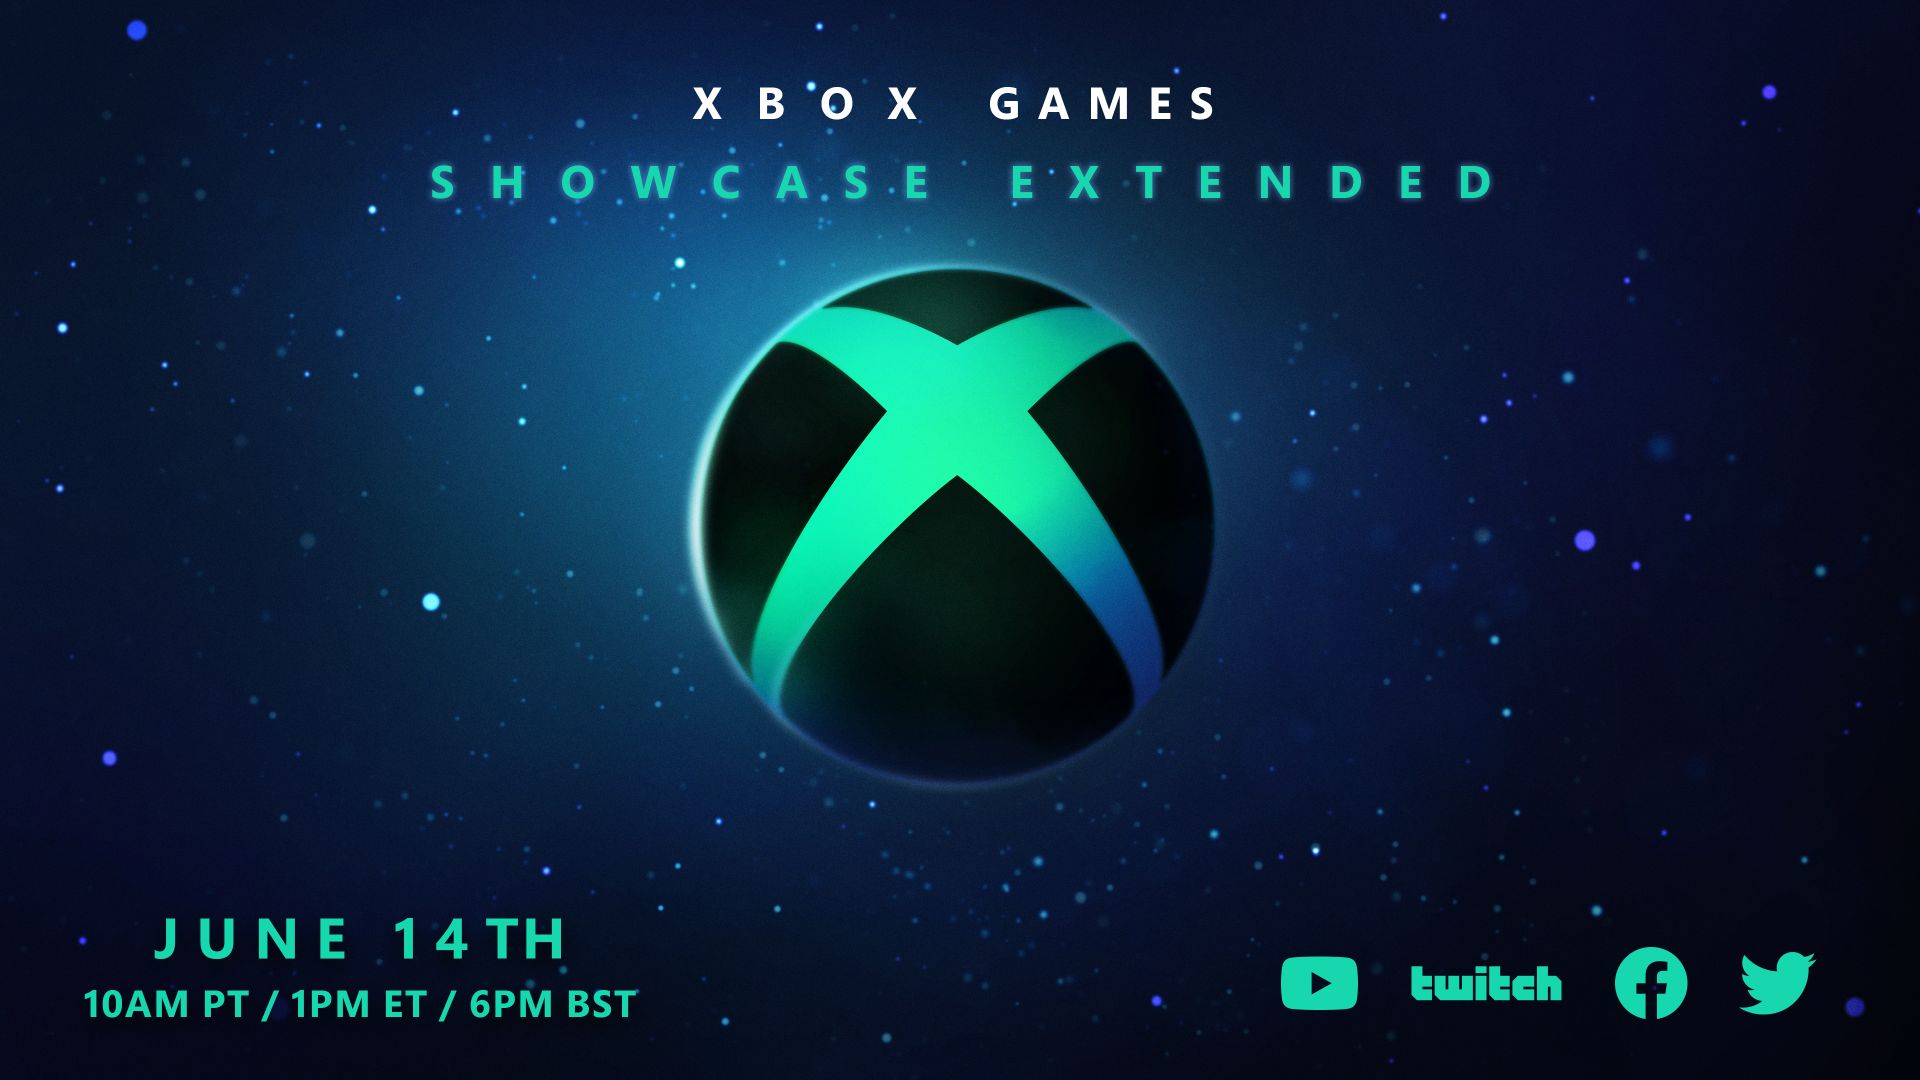 Xbox Games Showcase Extended 2022 Roundup